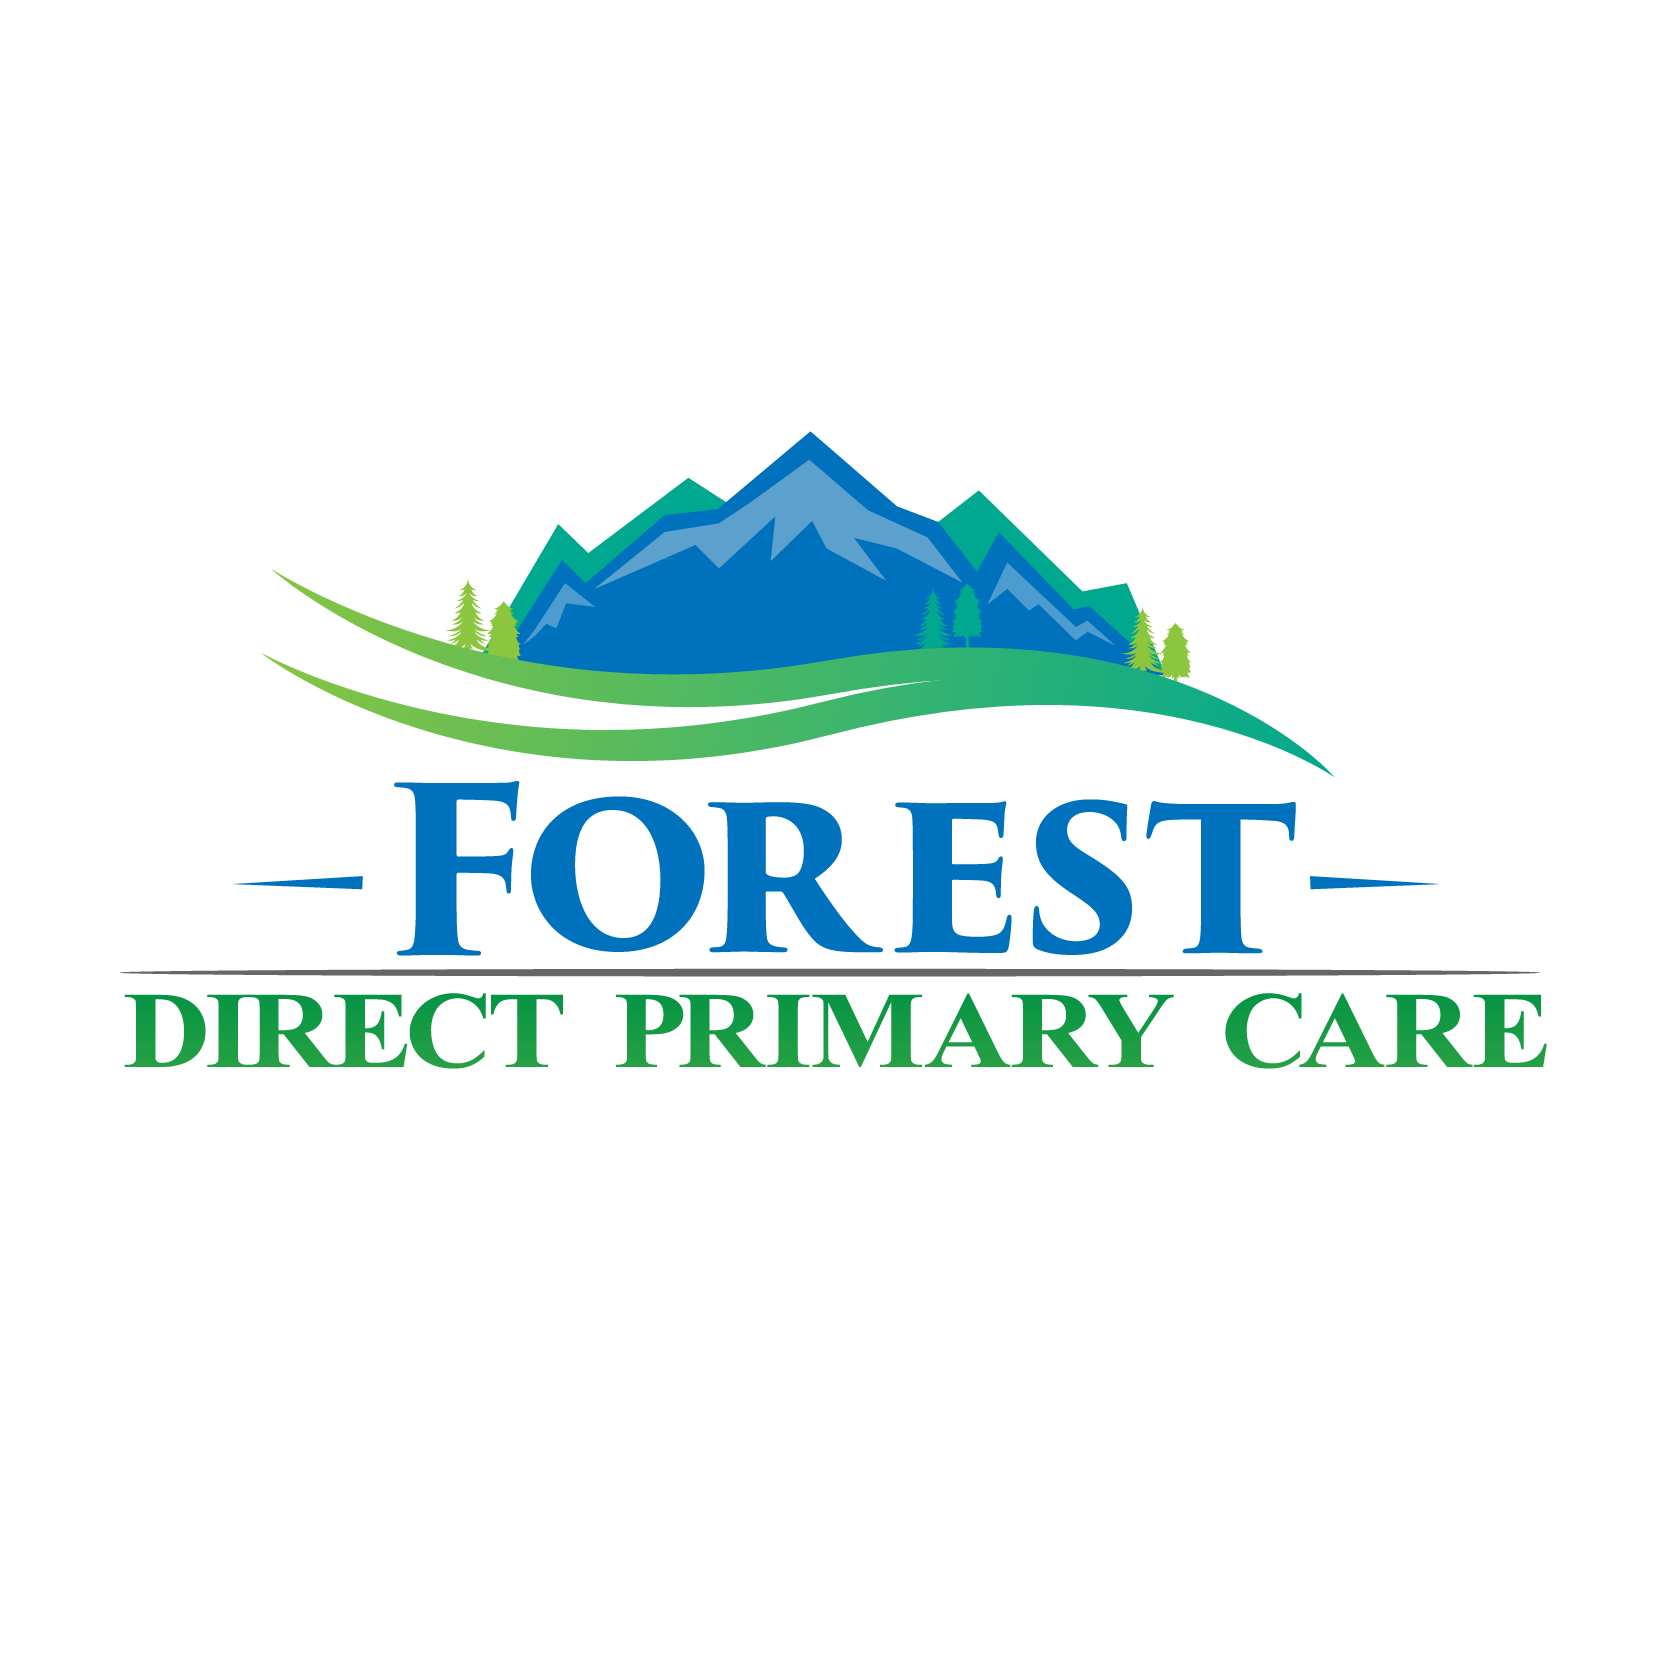 Forest Direct Primary Care is a health service in which patients get personal, accessible and comprehensive care for a low monthly fee.